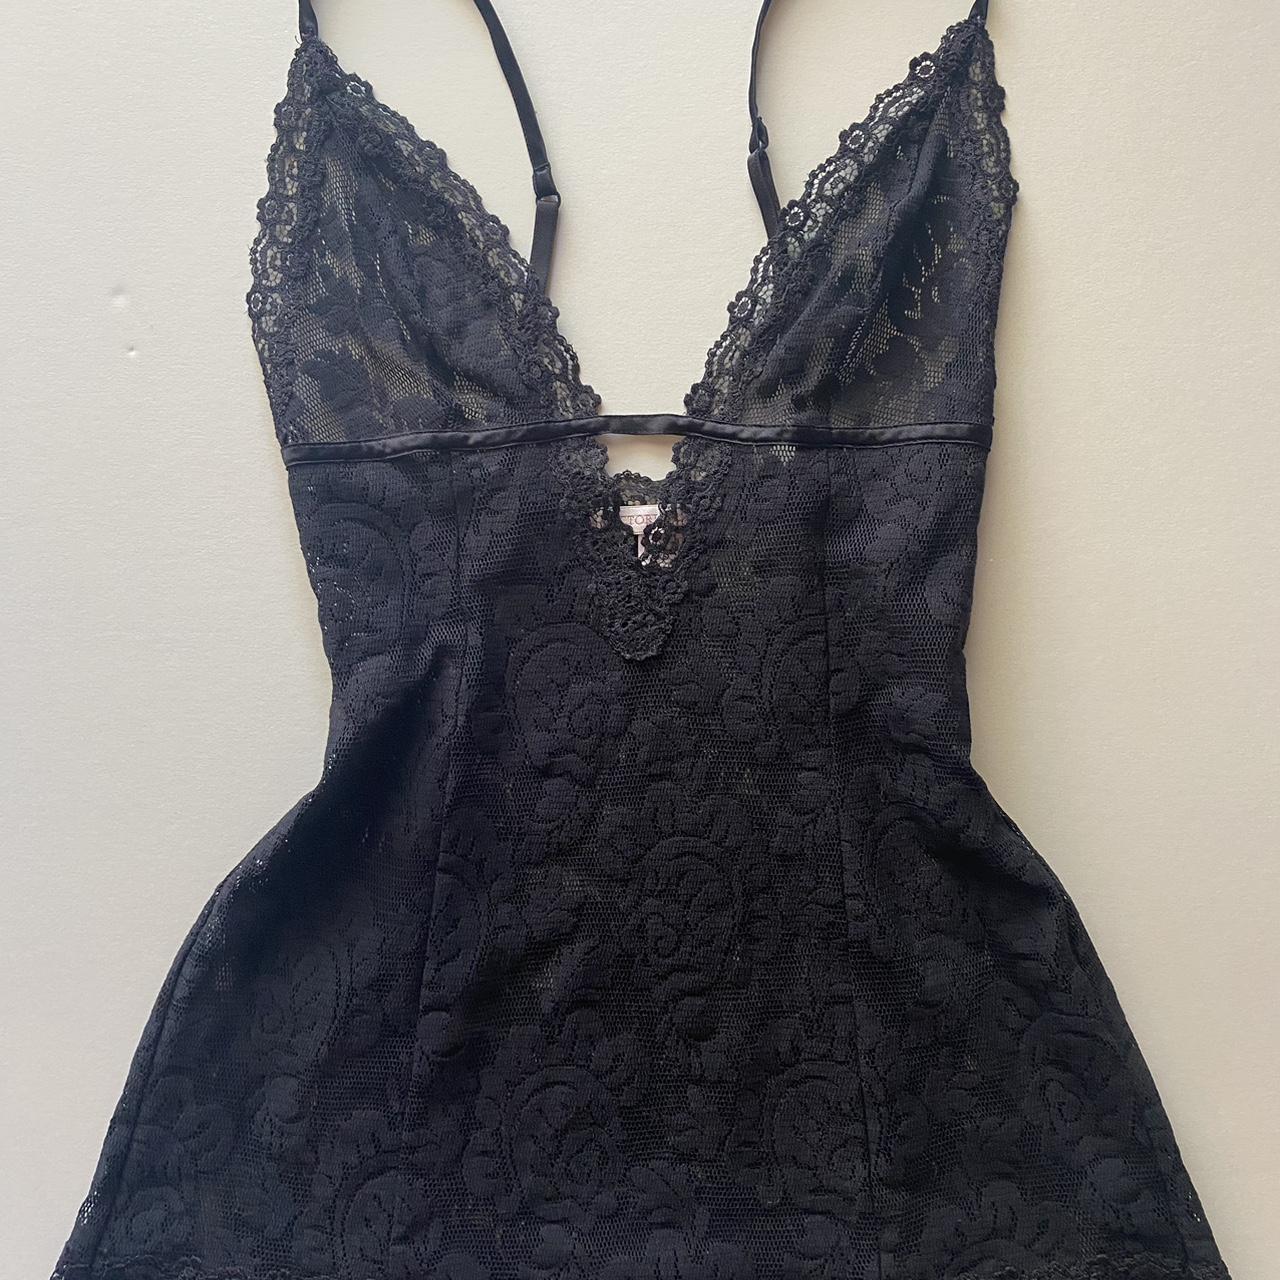 stunning lace Victoria’s Secret top see through and... - Depop